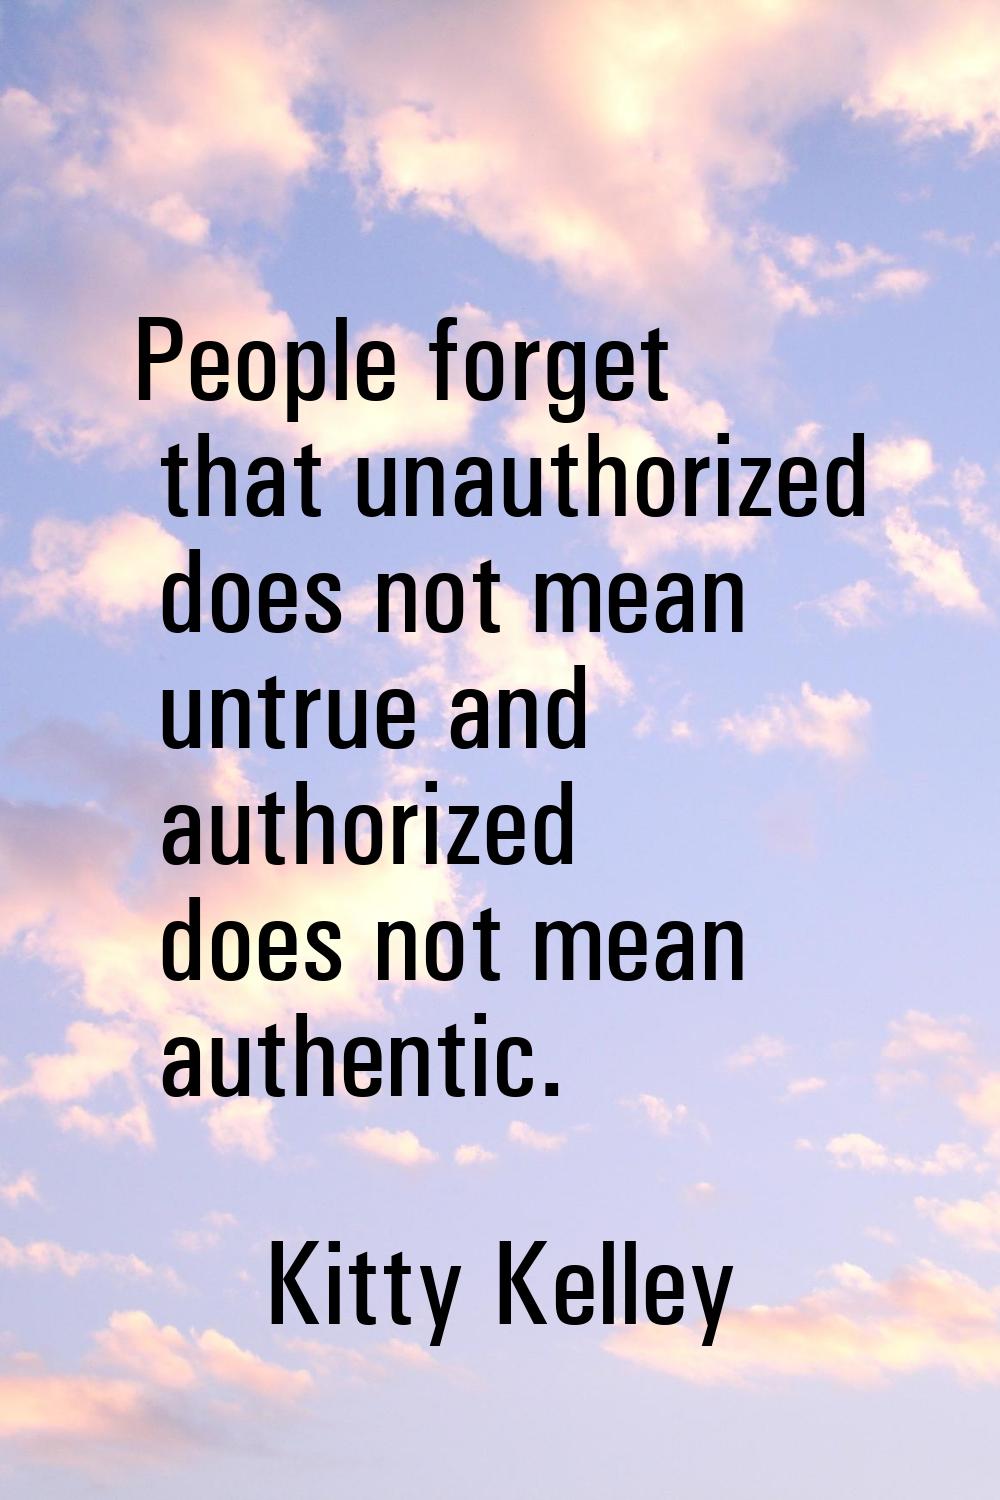 People forget that unauthorized does not mean untrue and authorized does not mean authentic.